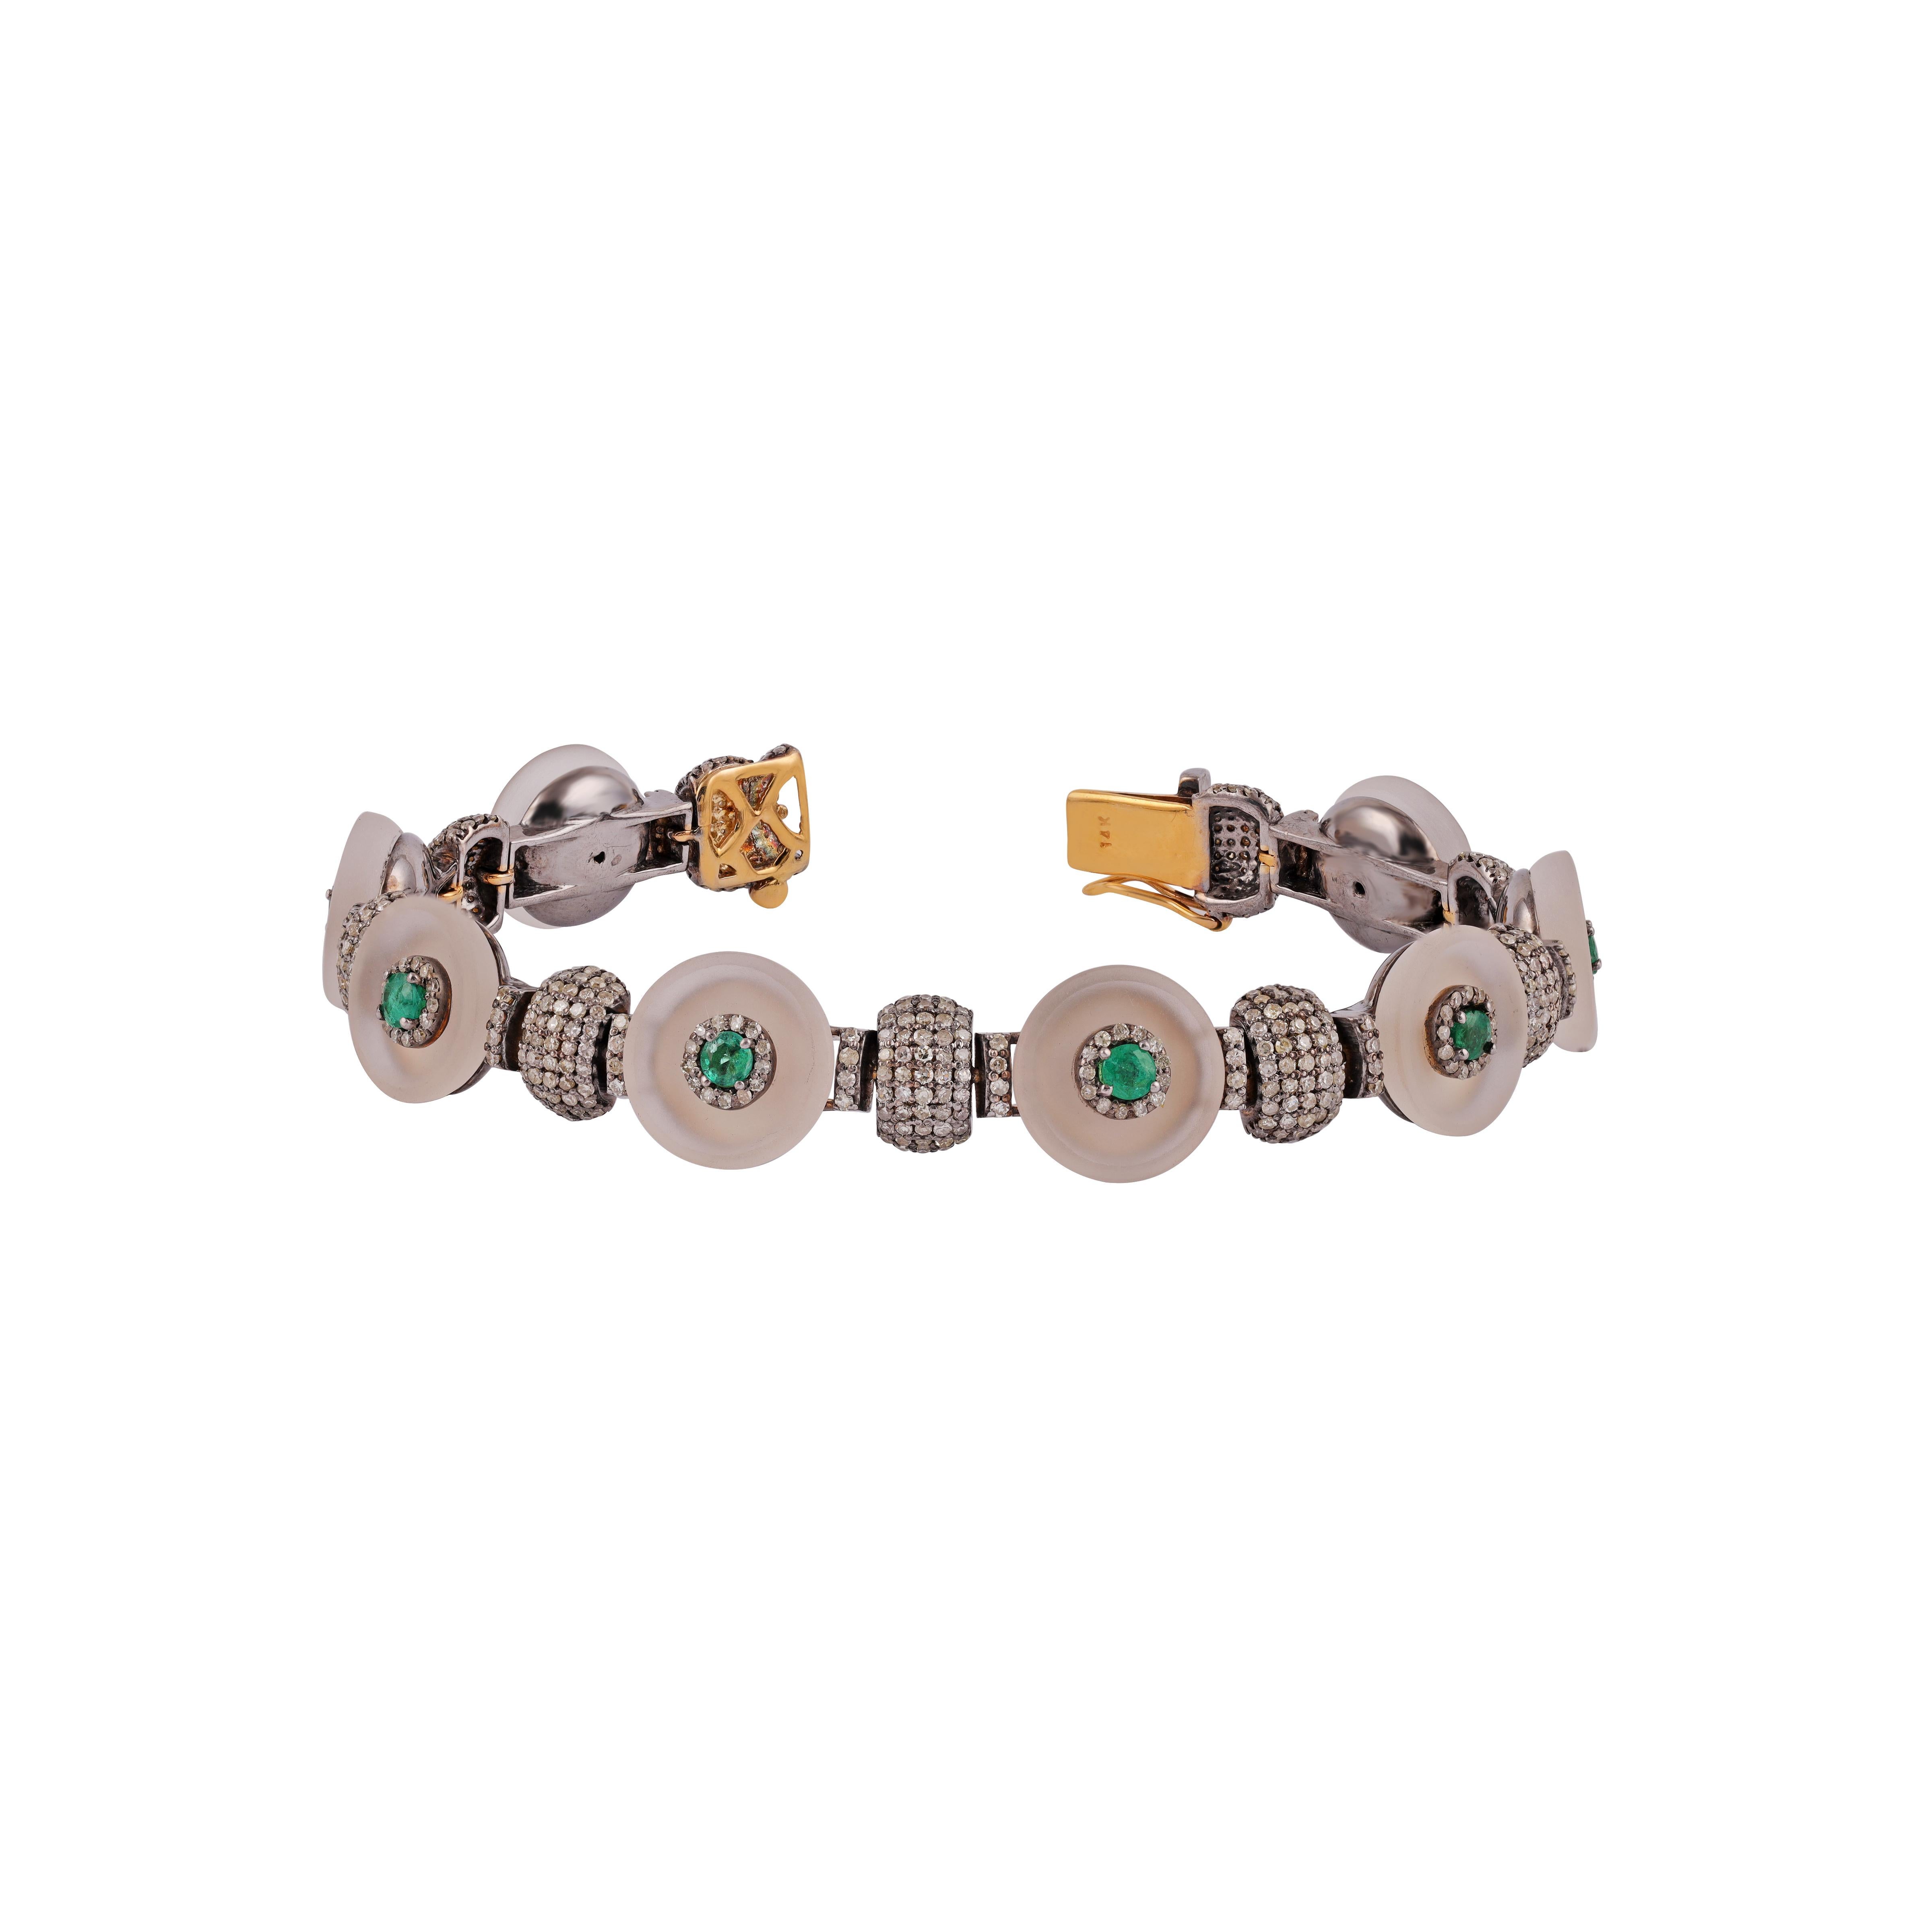 Antique Victorian  bracelet featuring Diamond , emeralds & crystal in 18k solid gold & Silver. This piece is luxurious and craftsmanship can be seen through out. The diamonds total carat weight is approx. 4.12cts, crystal 4.12cts ,emeralds